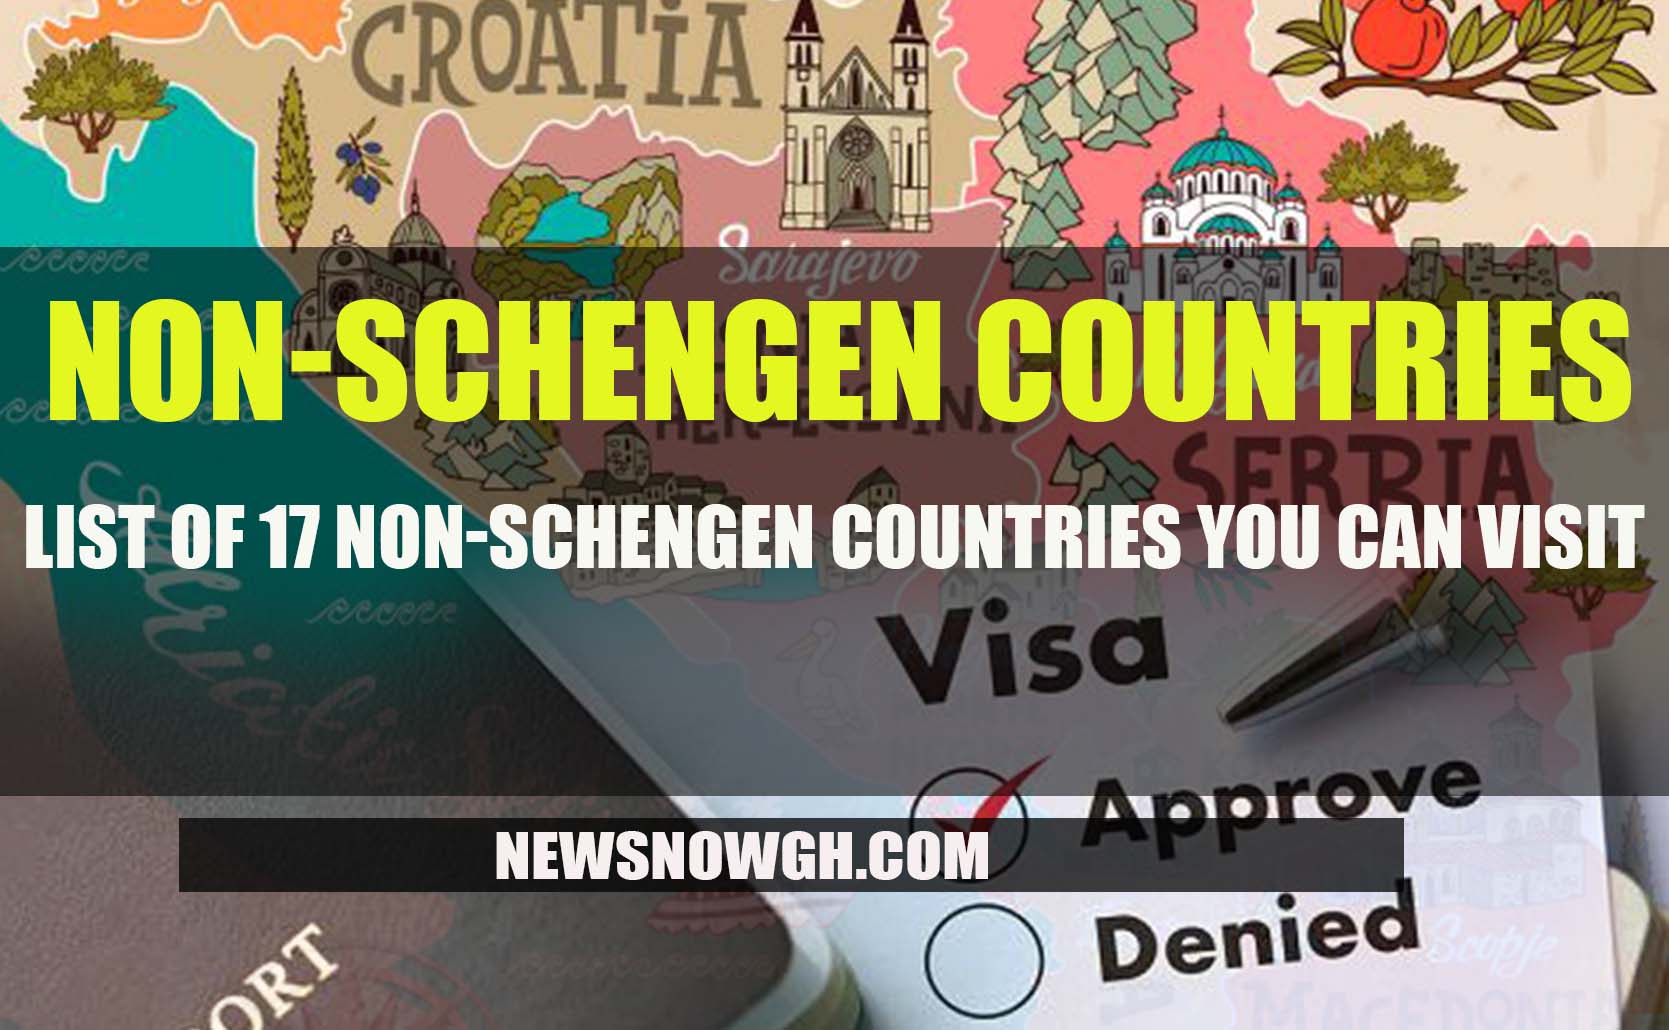 List of 17 NonSchengen Countries You Can Visit